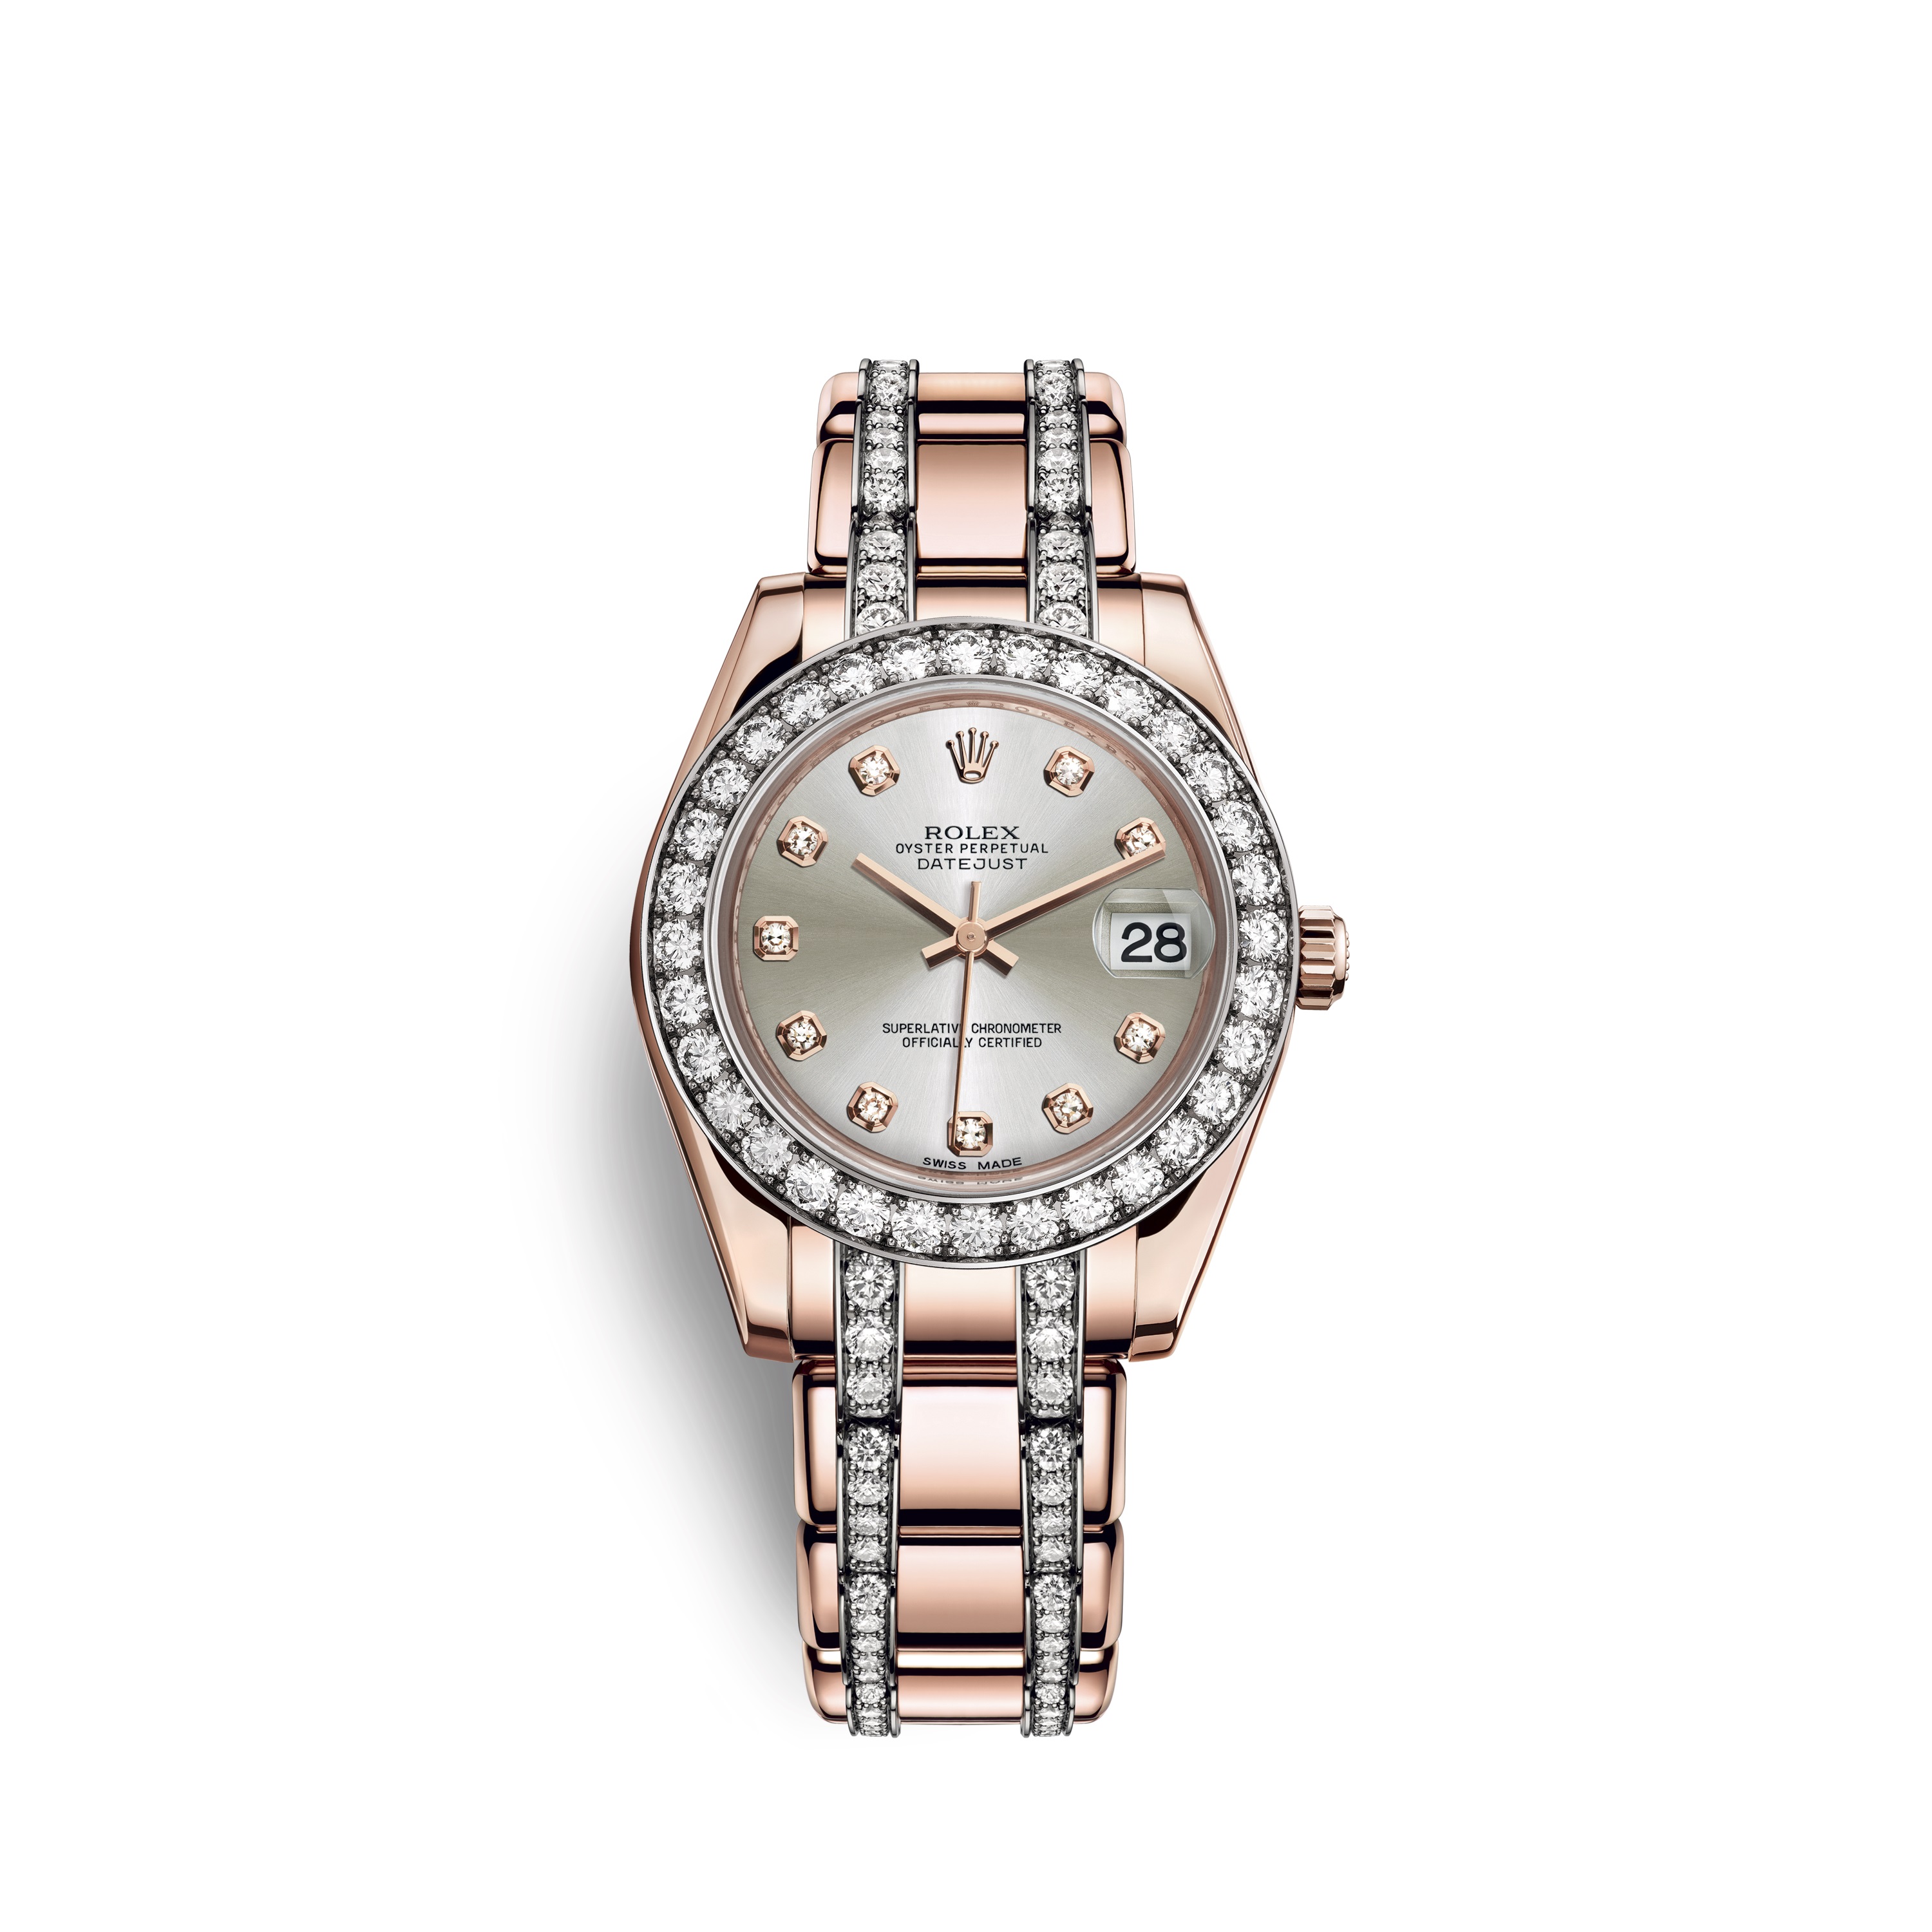 Pearlmaster 34 81285 Rose Gold & Diamonds Watch (Silver Set with Diamonds)